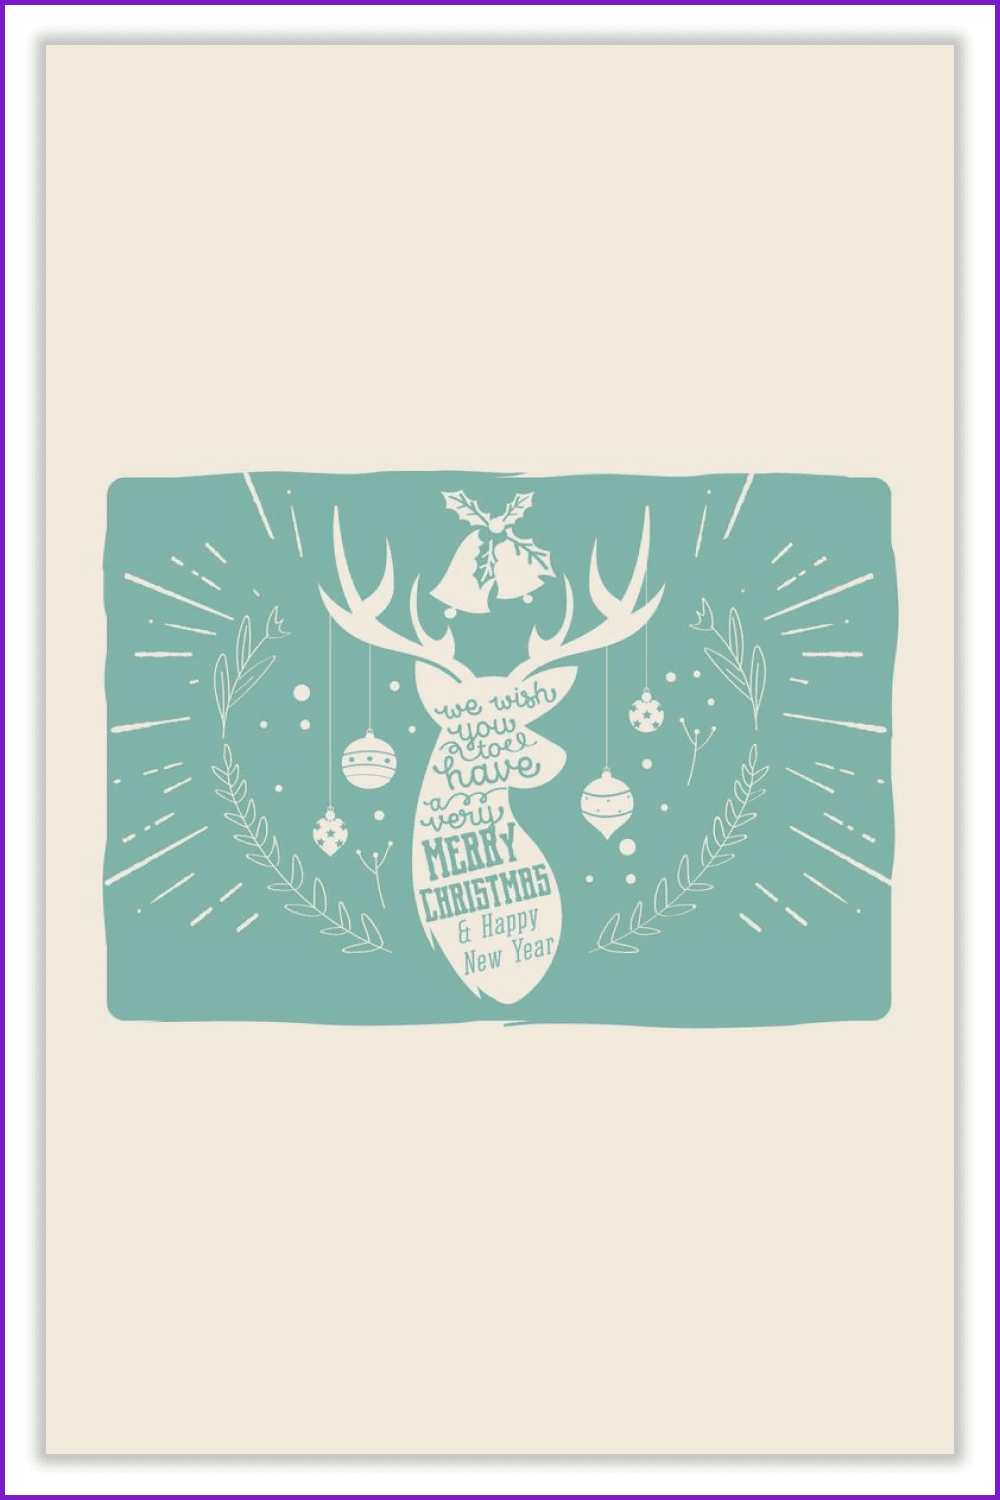 Reindeer silhouette with Christmas decorations and wishes on a green background.